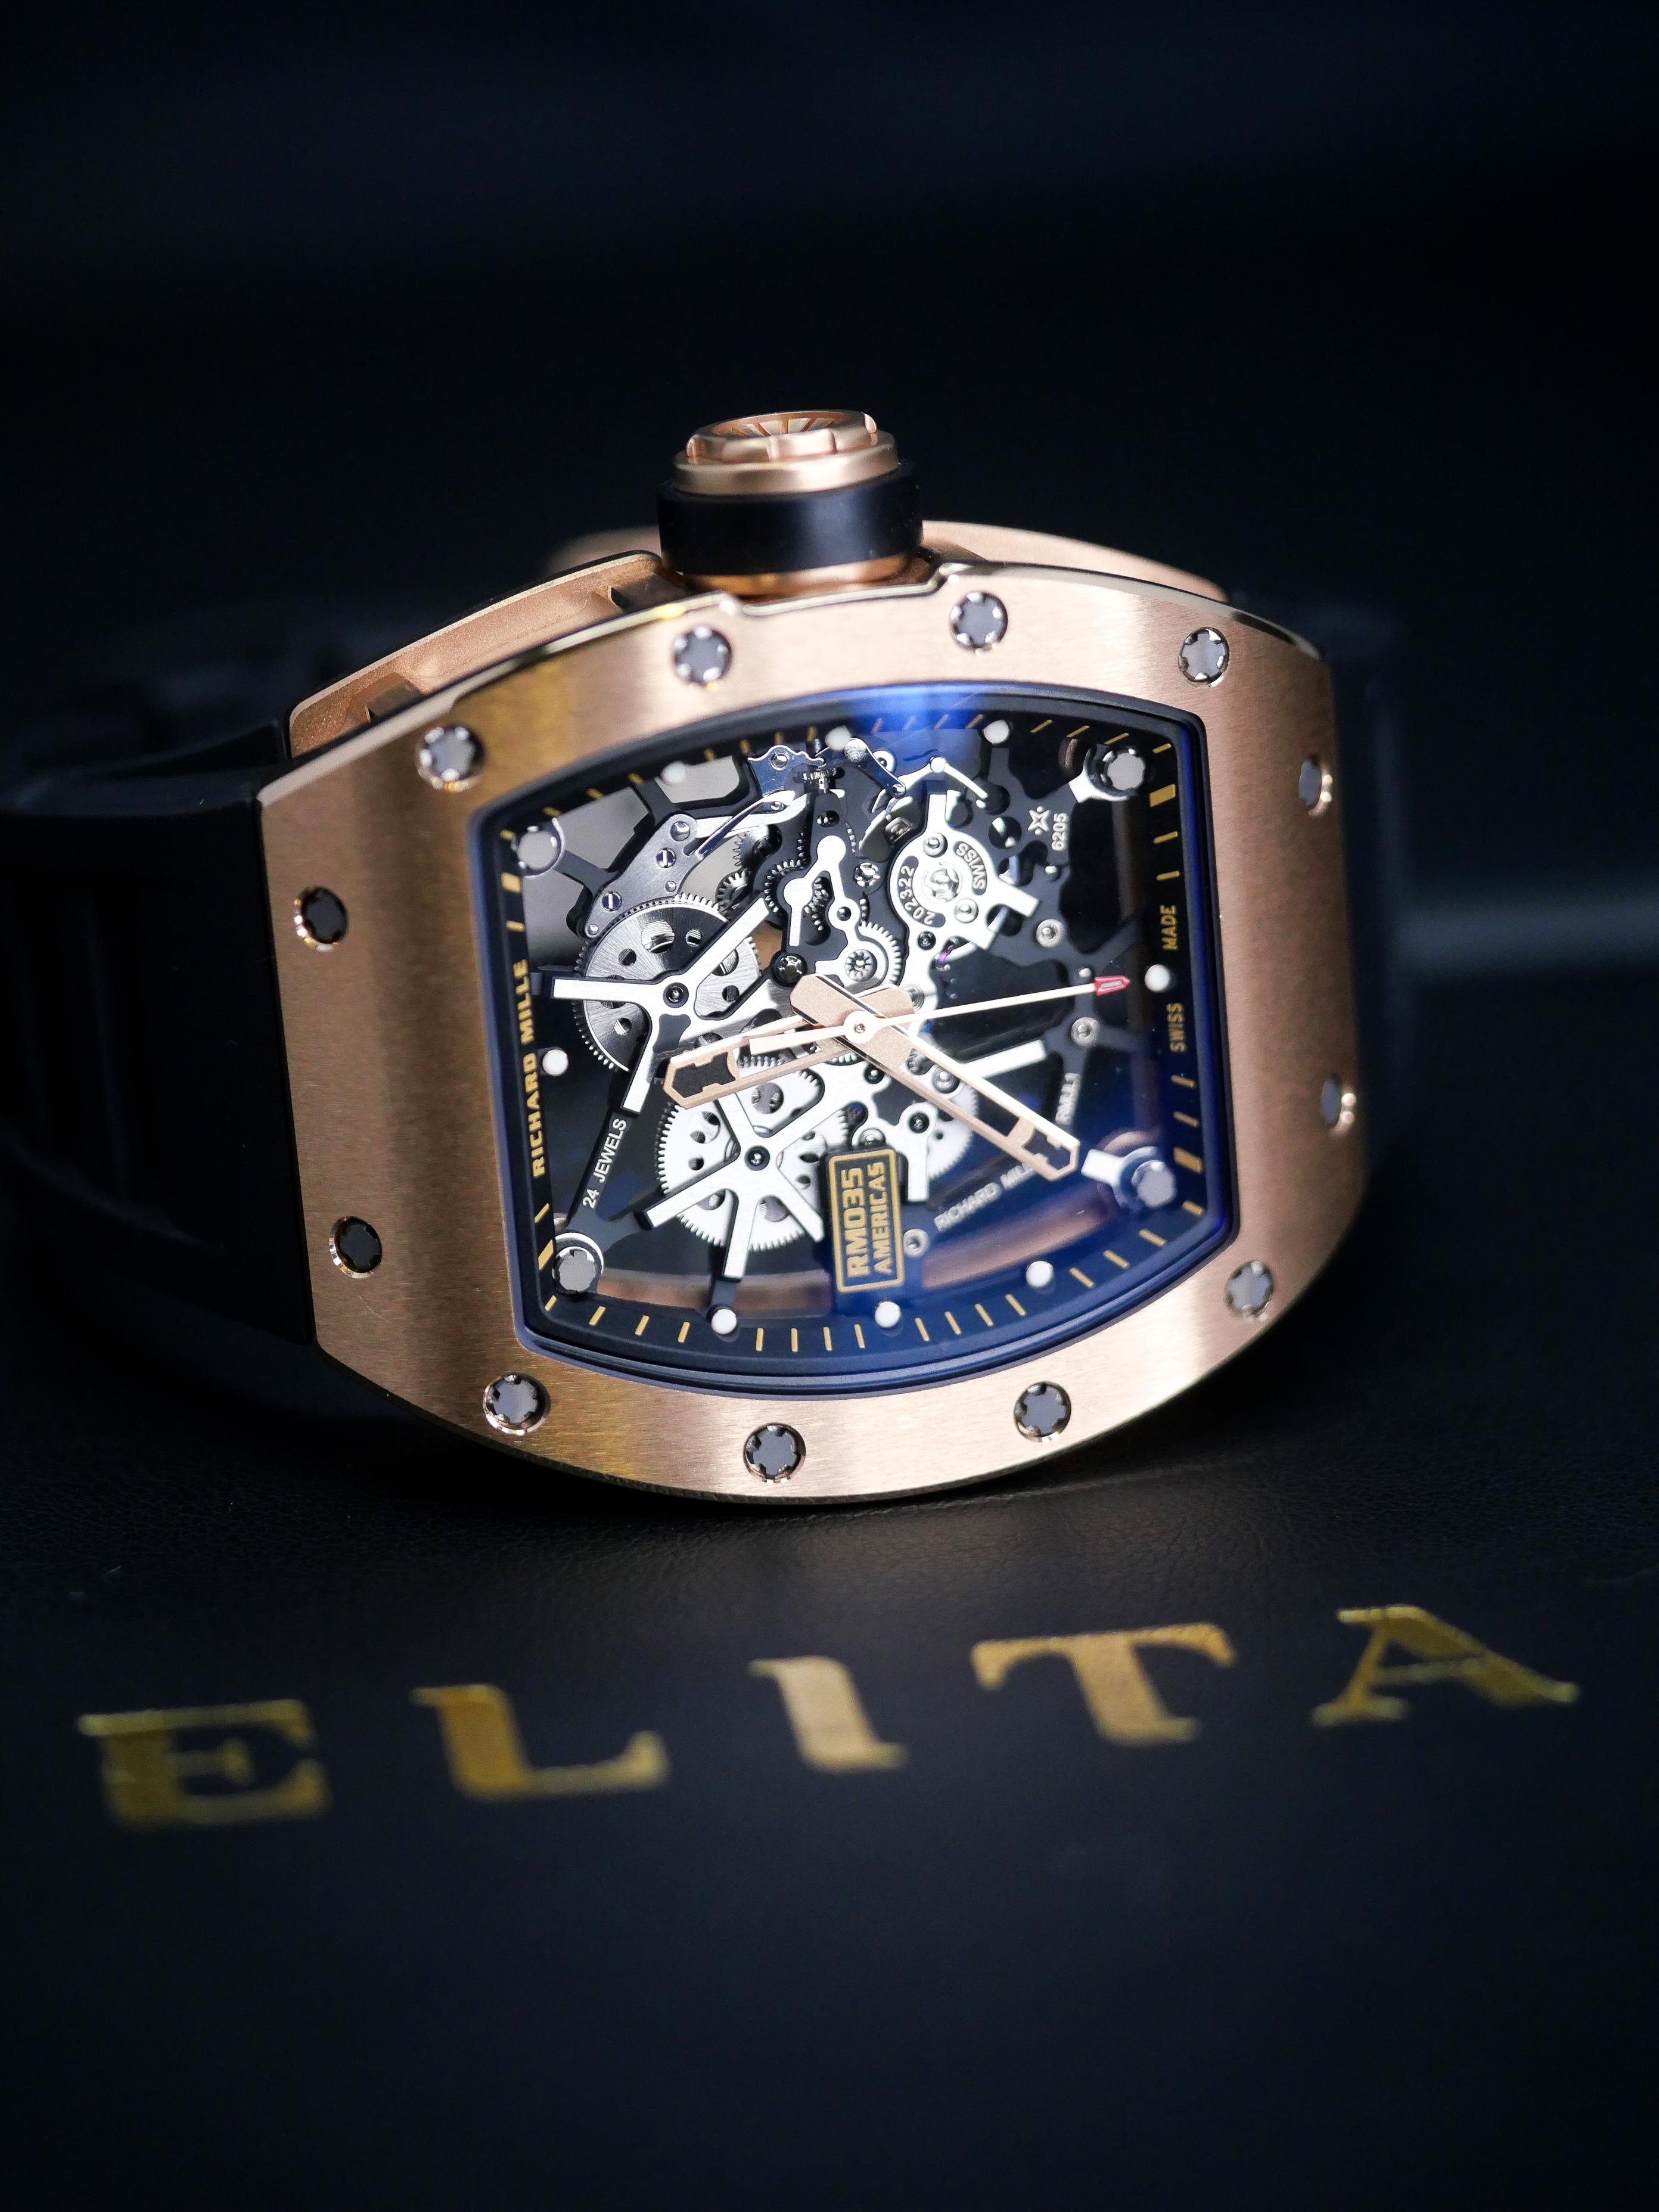 Richard Mille RM 035 Gold Toro 

Satin-finished 18K red gold forms the tripartite, tonneau-shaped case of the new Richard Mille RM 035 Gold Toro. The watch's crown, buckle and hands are also crafted in the precious metal. Presented on a black rubber